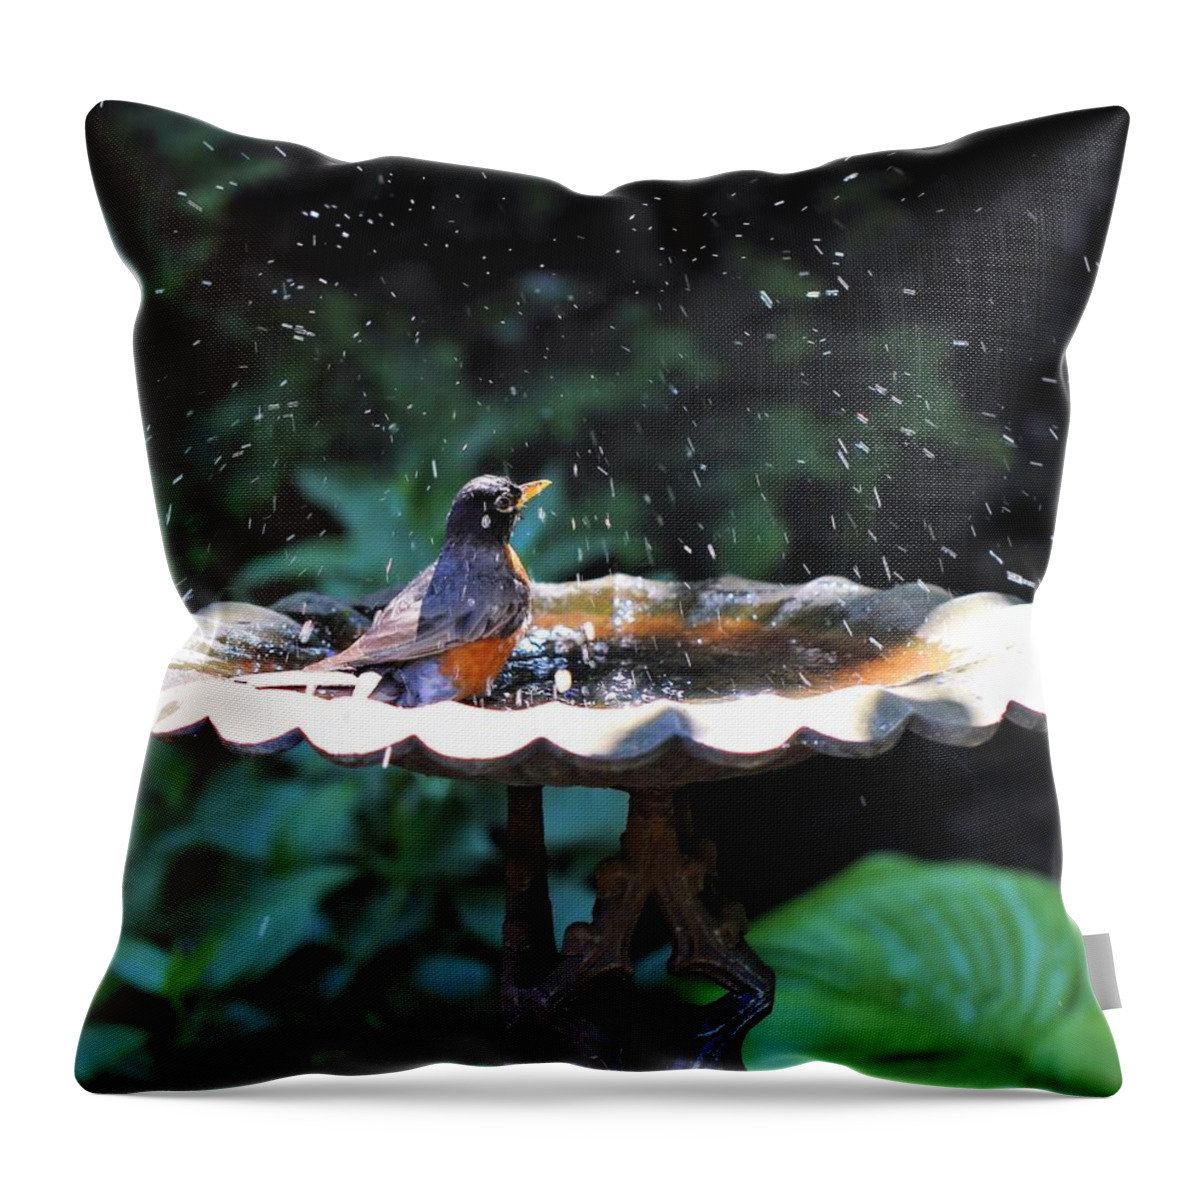 American Robin Throw Pillow featuring the photograph Bath Time by Katherine White